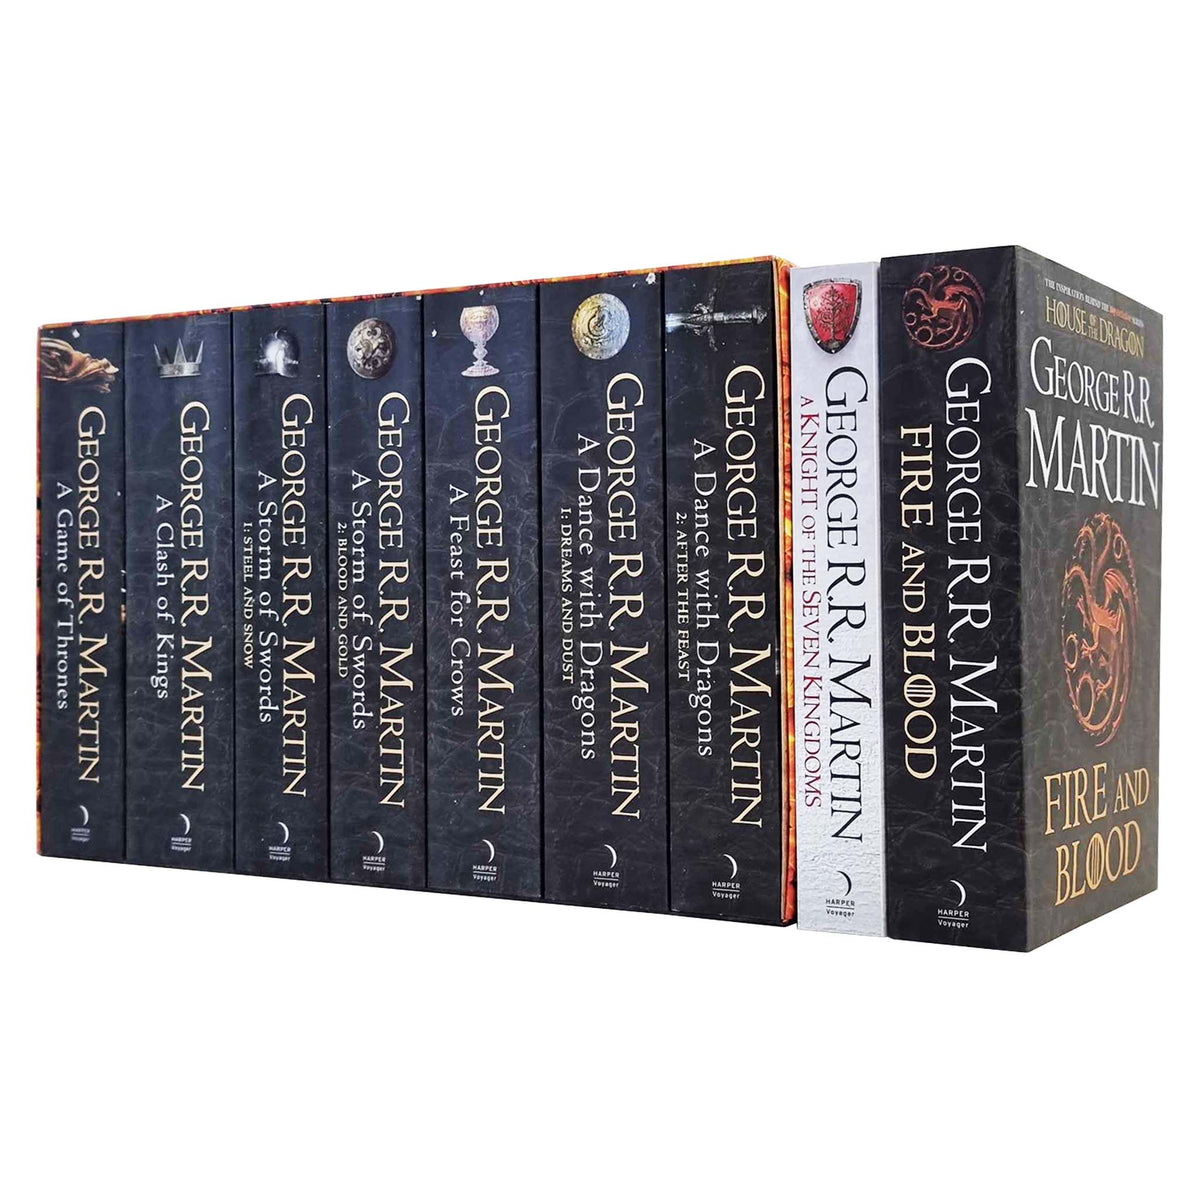 Game of Thrones Books in Order (George R.R. Martin)